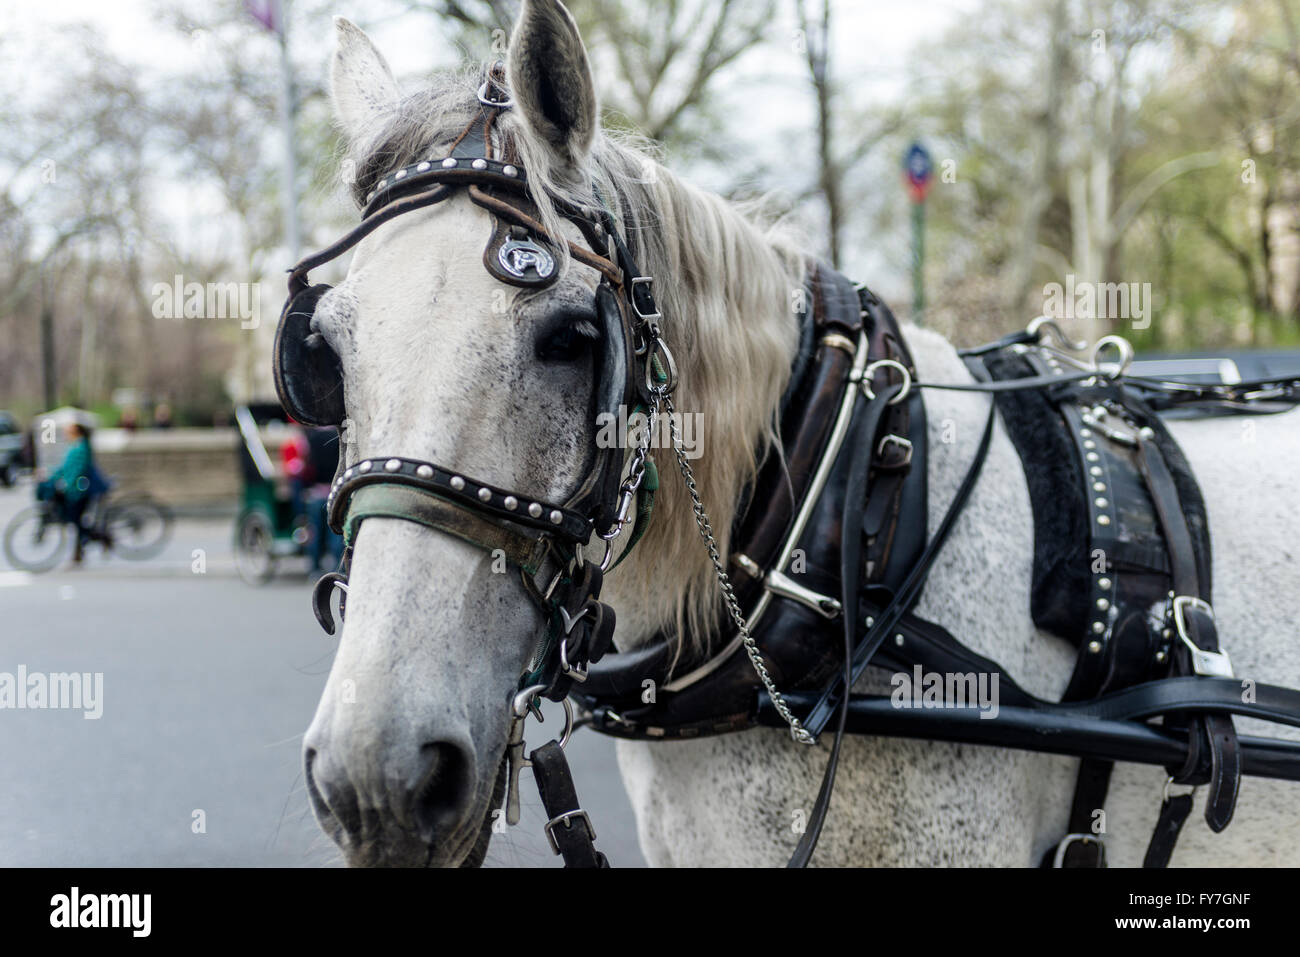 New York, NY 31 March 2016 - White carriage horse at Grand Army Plaza near Central Park South. Stock Photo